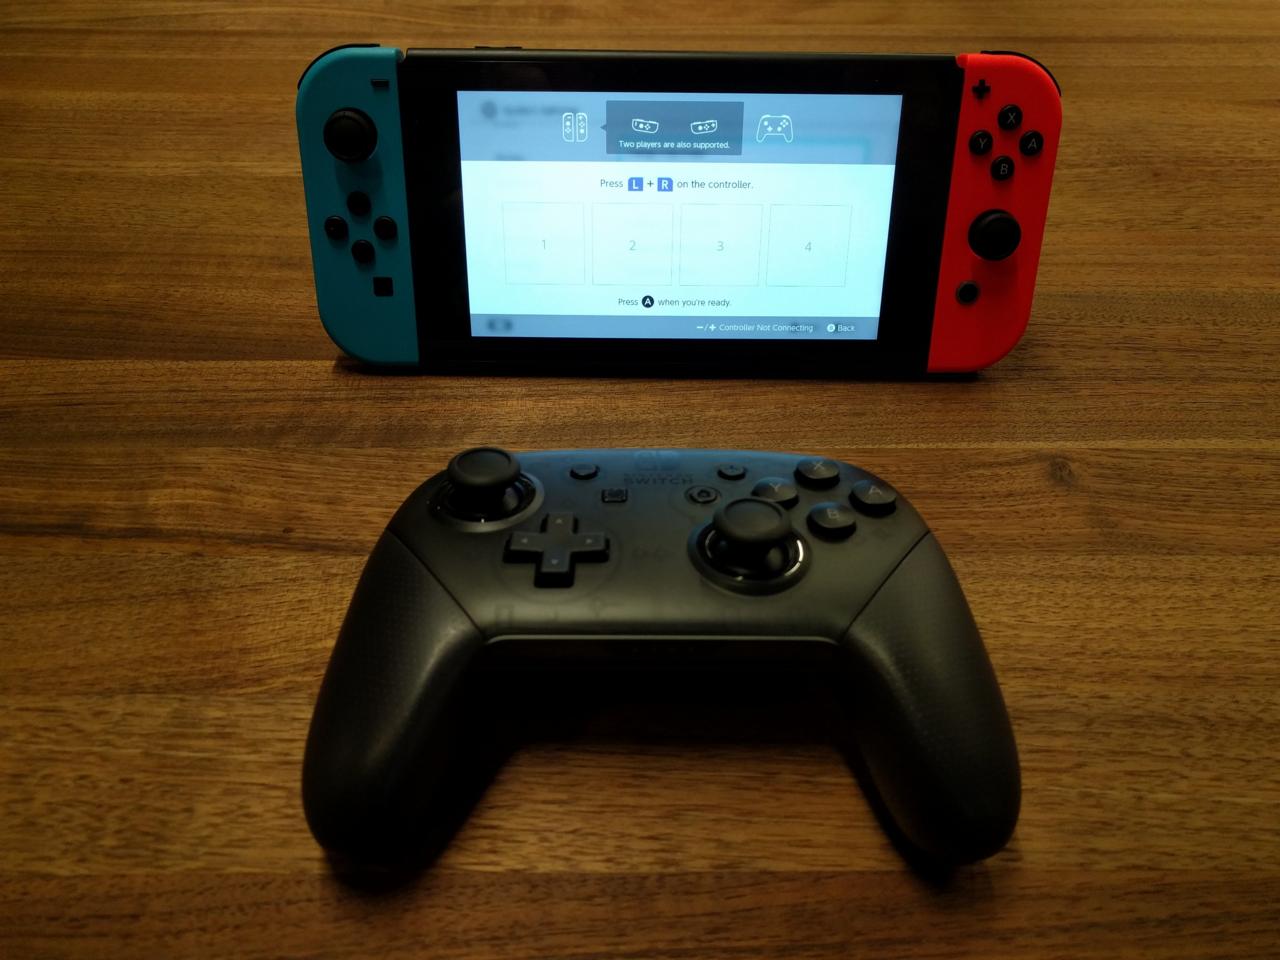 In terms of wireless connections, the Switch supports Bluetooth 4.1 and 802.11ac Wi-Fi.